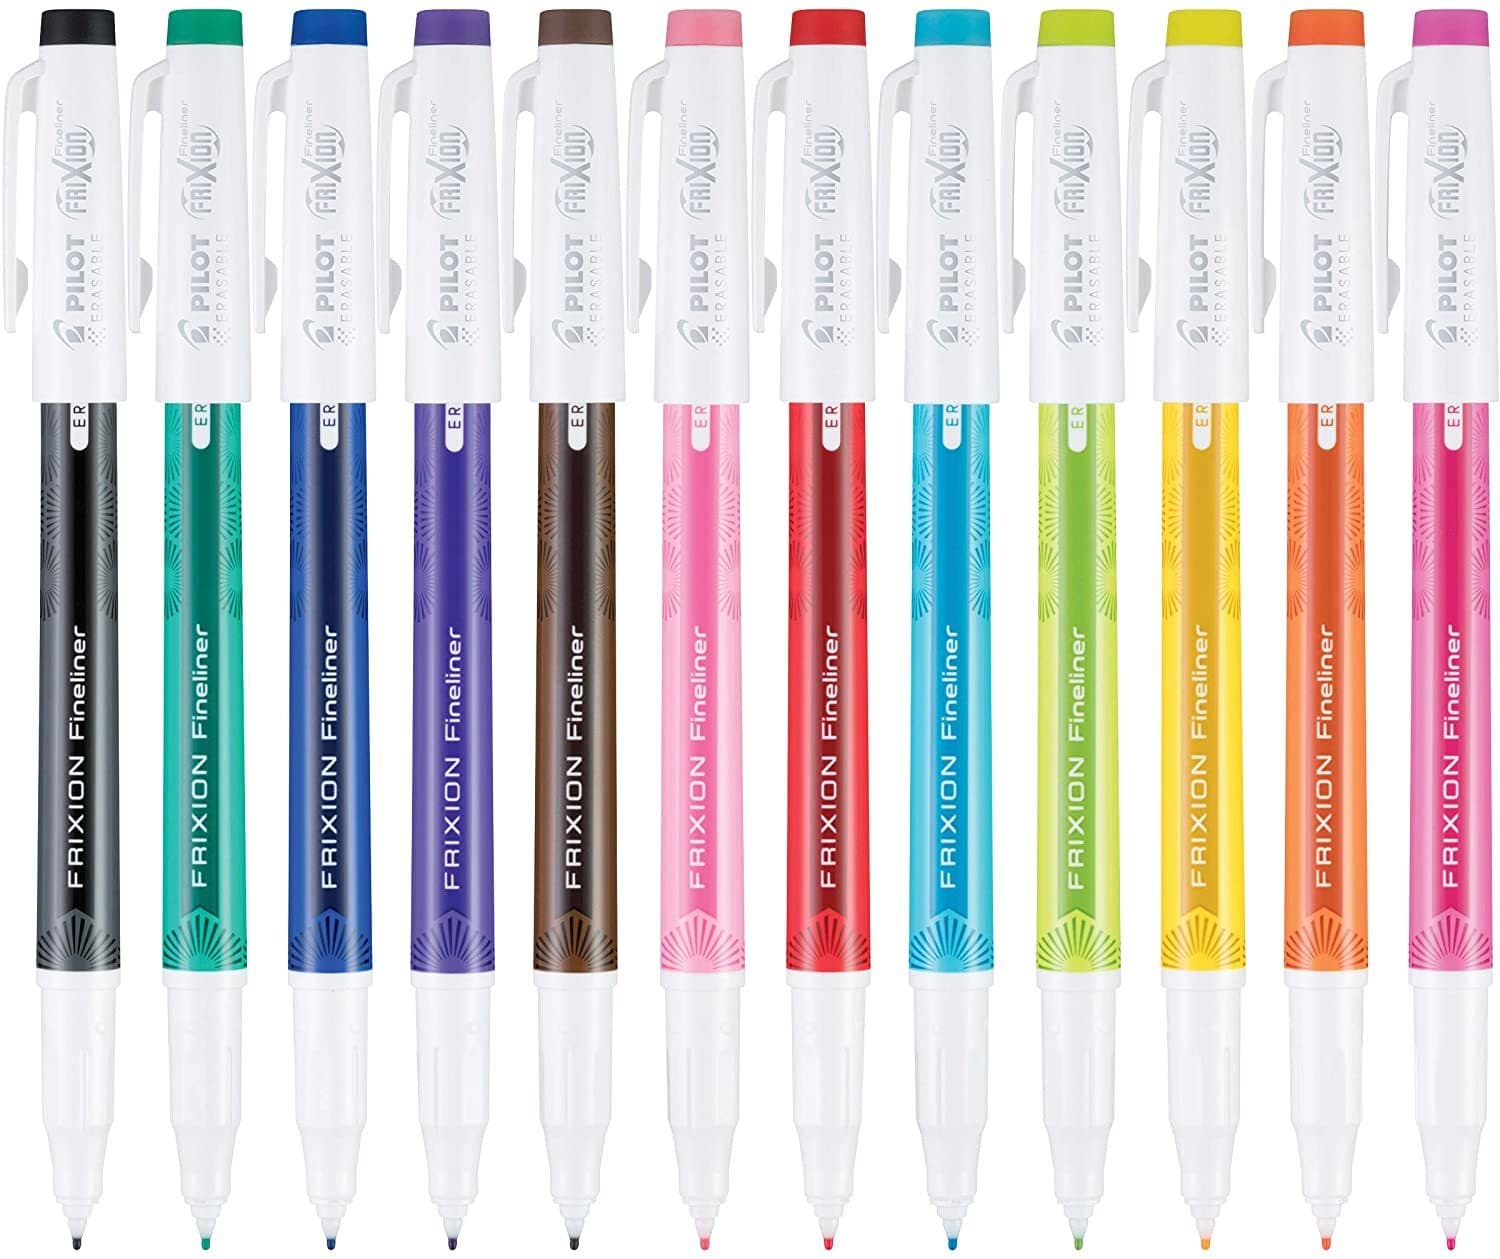 Imprinted Note Writers Fine Point Felt Tip Markers Eight Packs